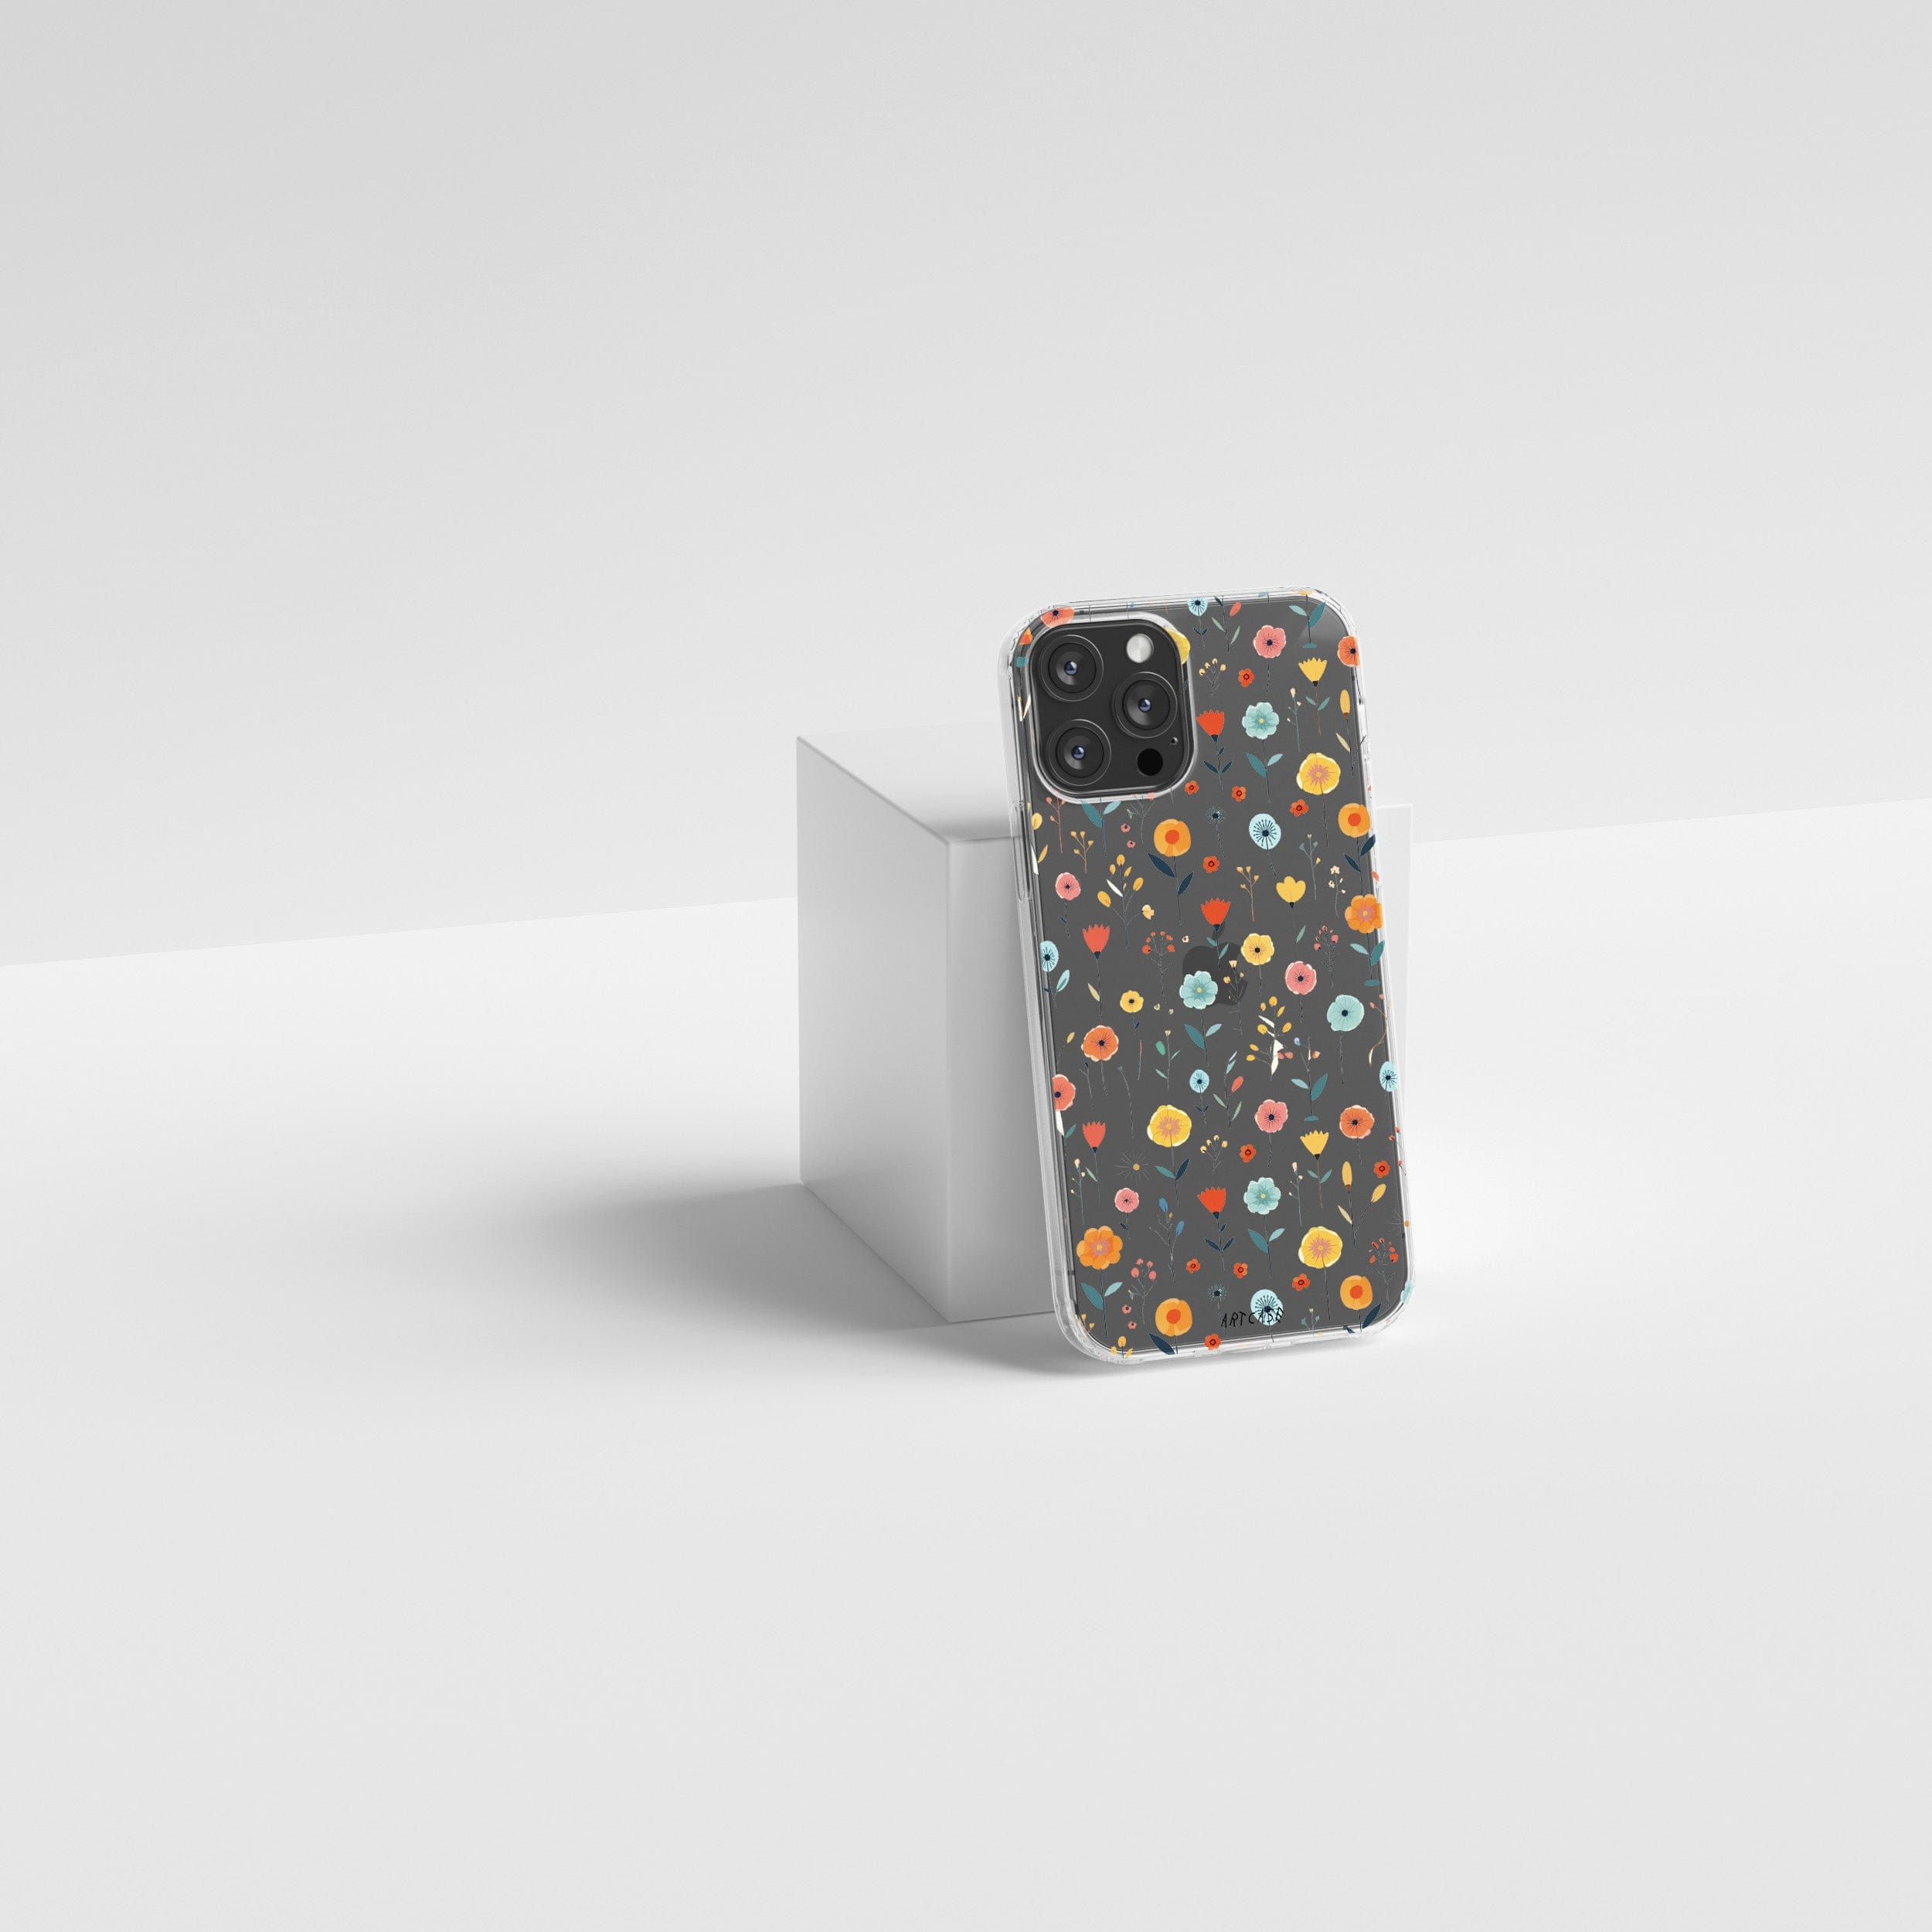 Transparent silicone case "Collage of flowers"